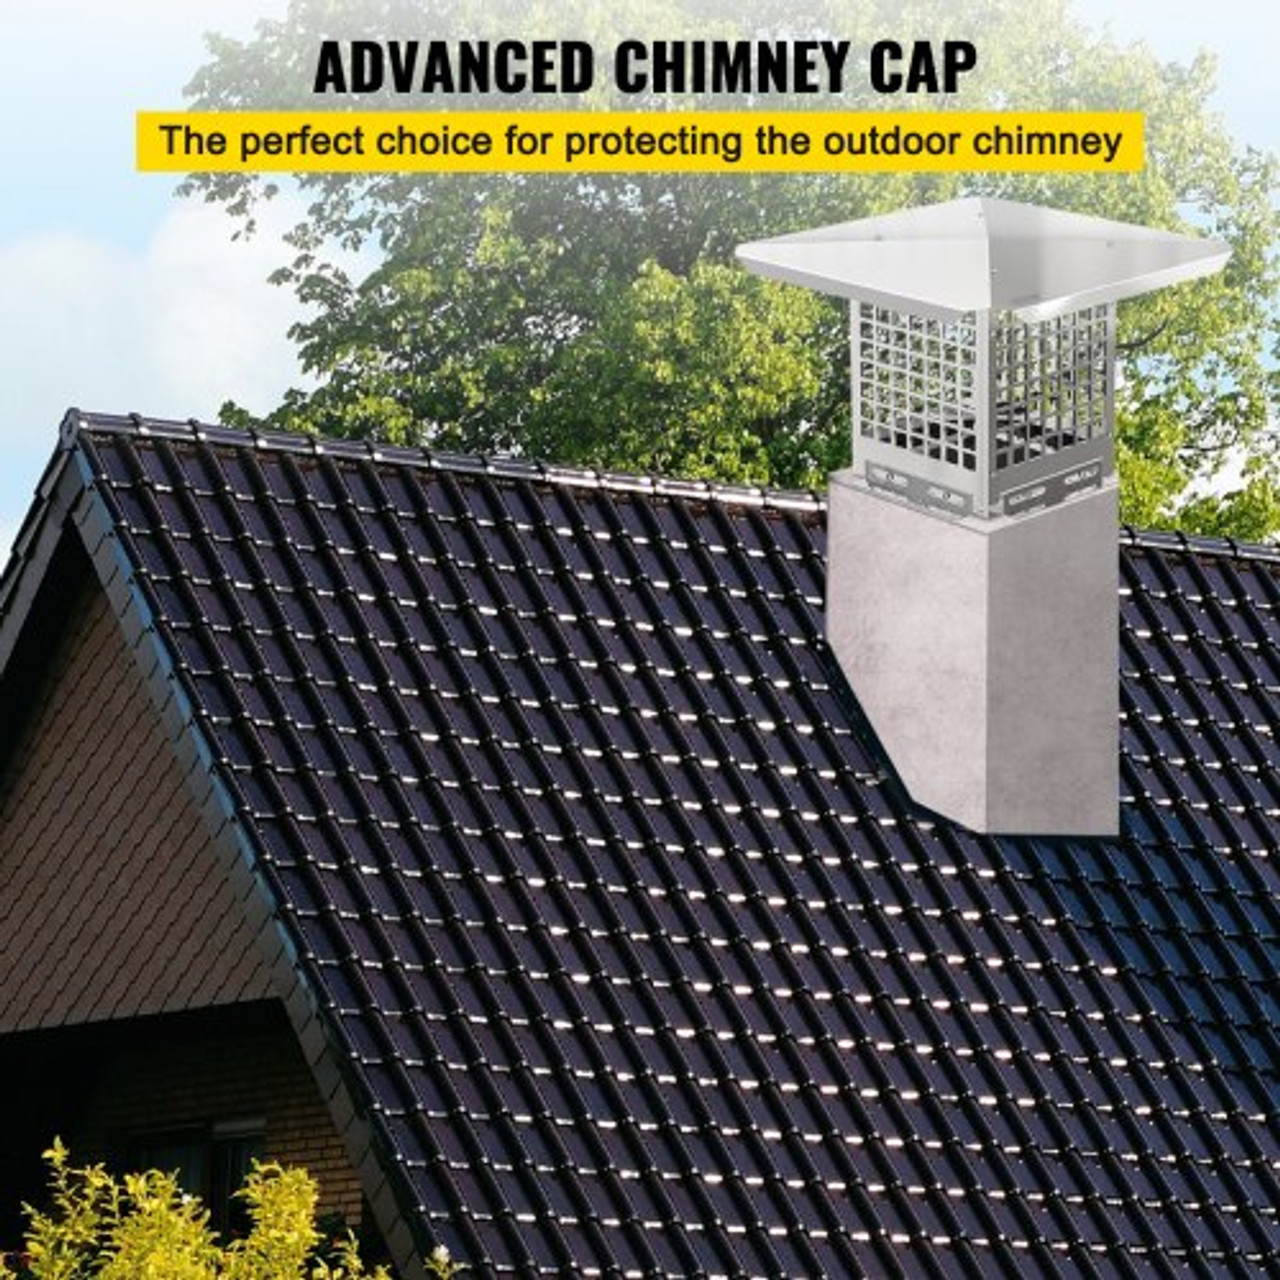 How to Build a Concrete Block and Ceramic Flue Tiled Chimney